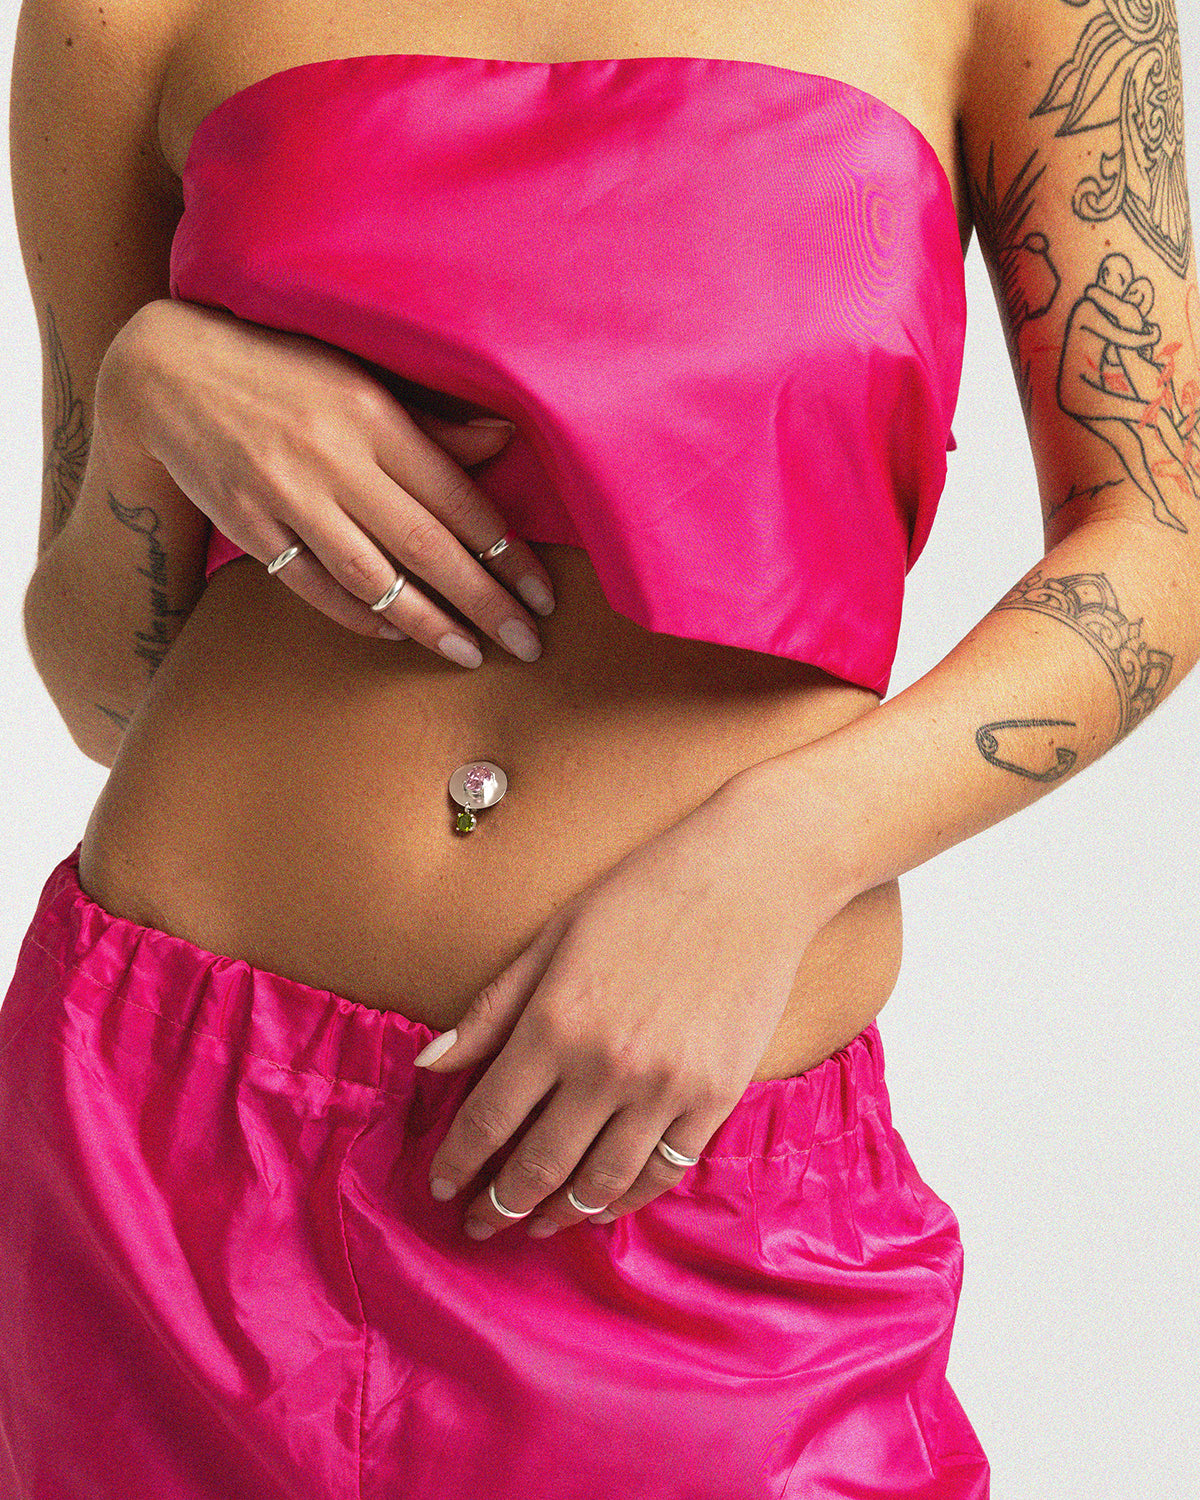 FAKE BELLY BUTTON EARRING